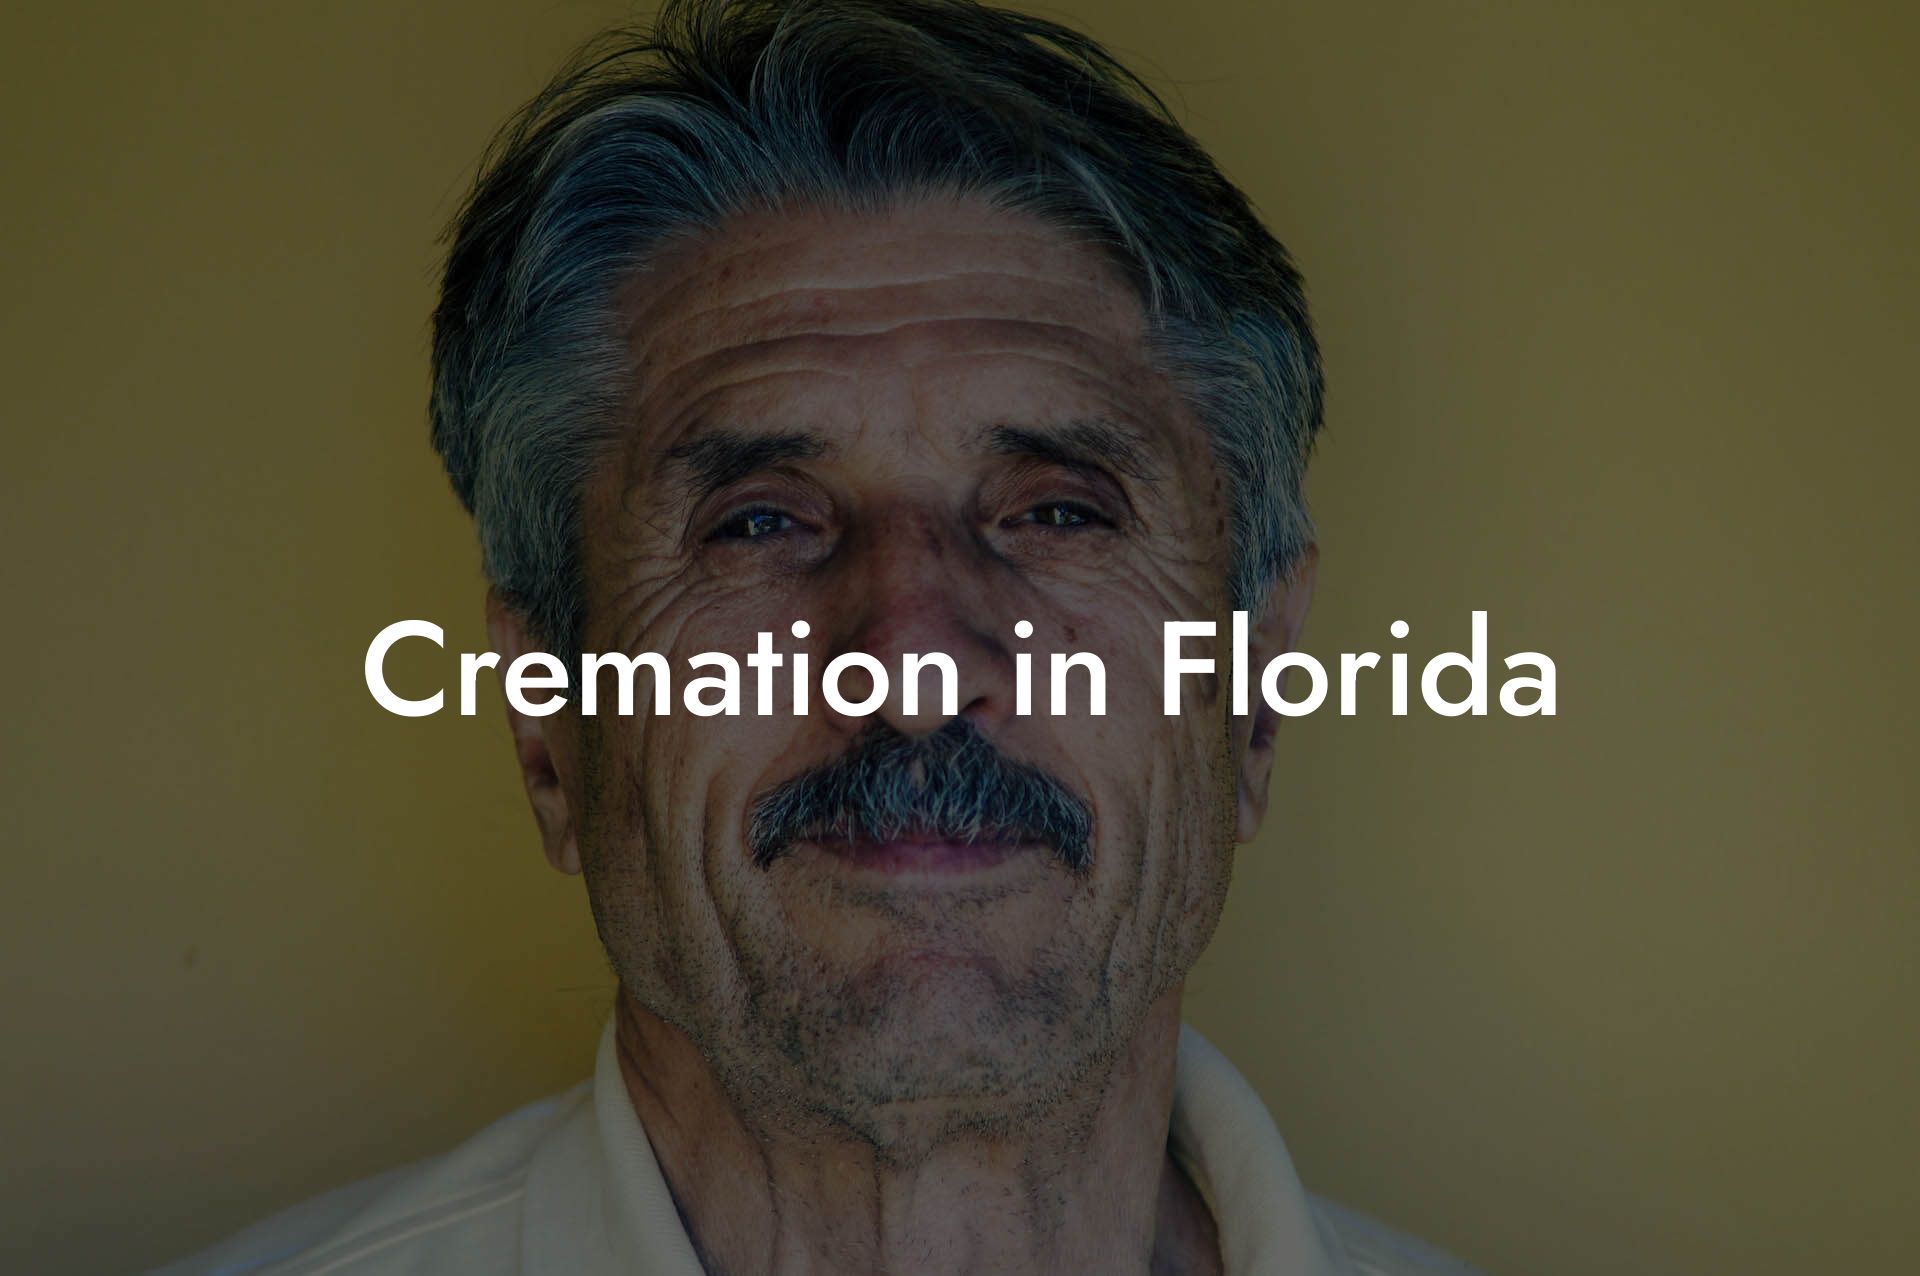 Cremation in Florida